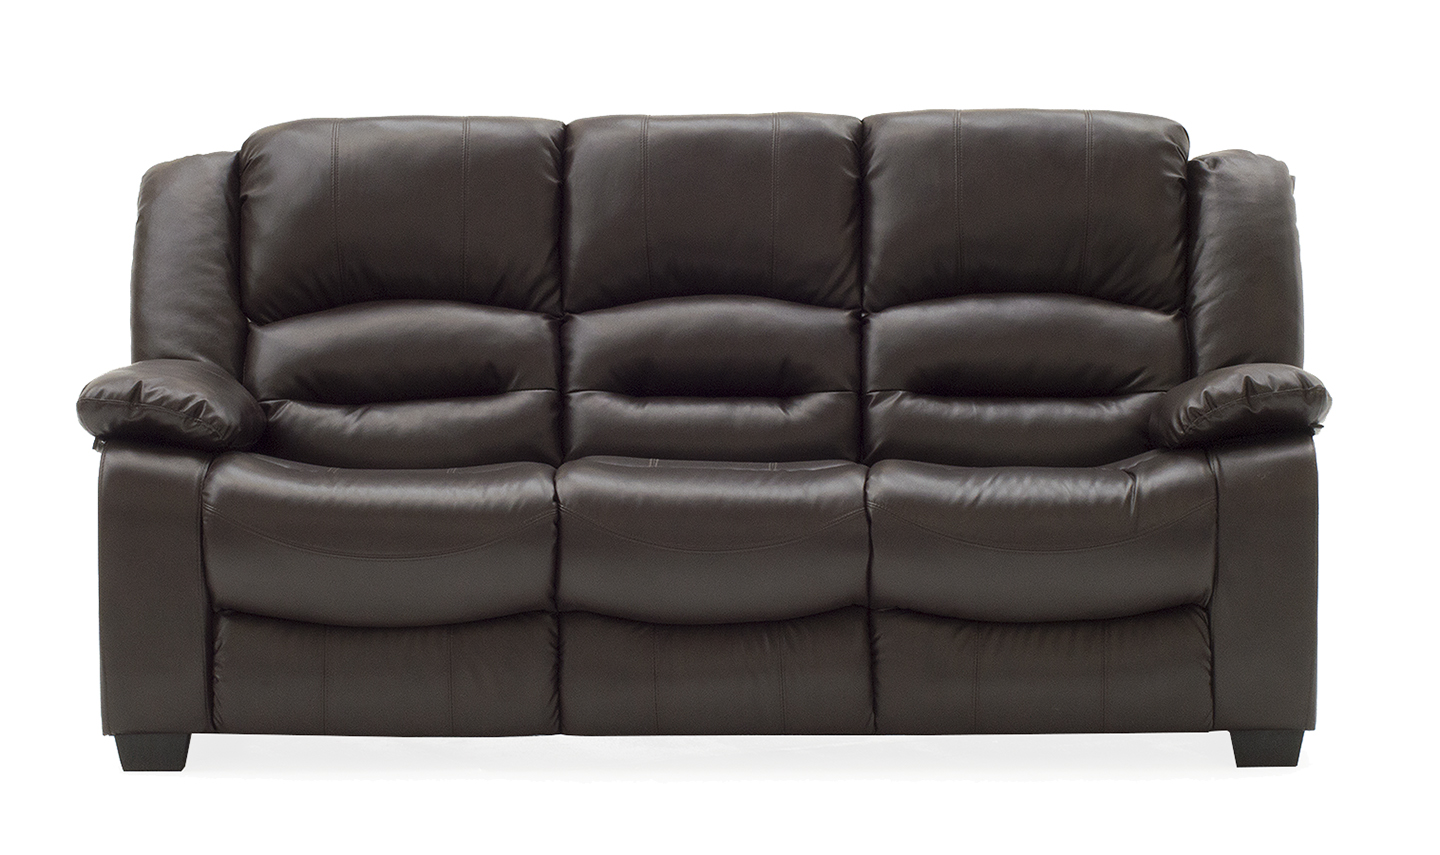 Barletto Brown 3 Seater Leather Sofa